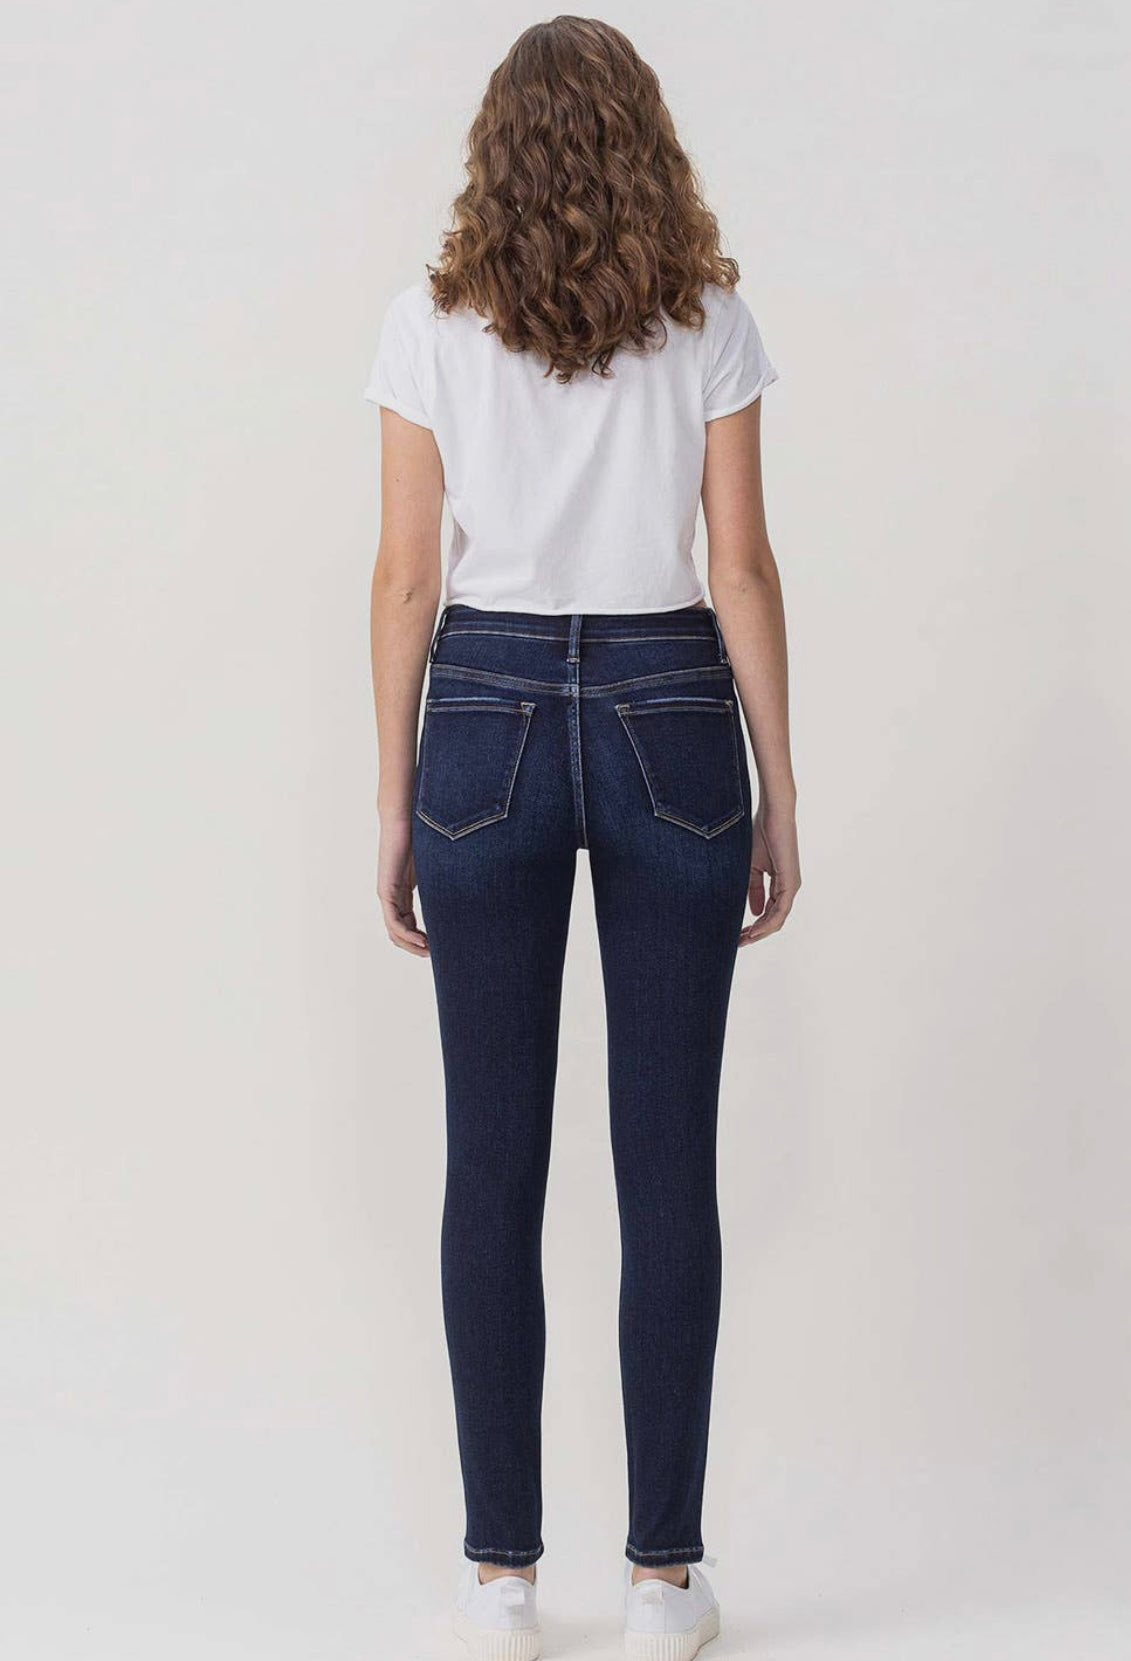 Mid Rise Ankle Skinny Jeans by Vervet